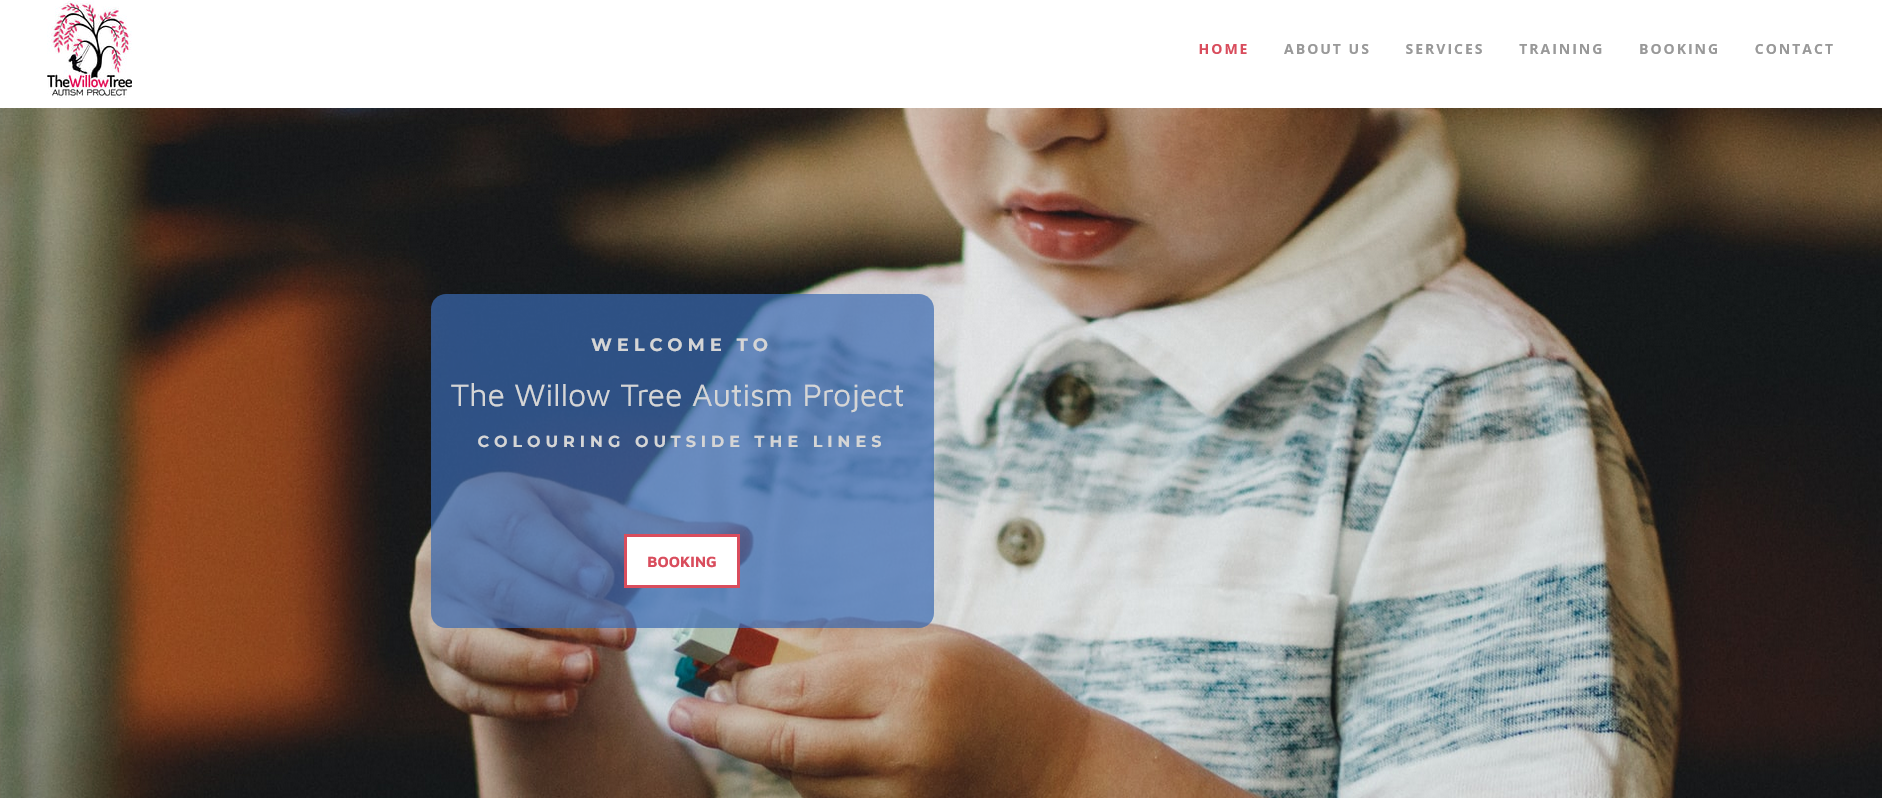 clonmel website design for The Willow Tree Autism Project